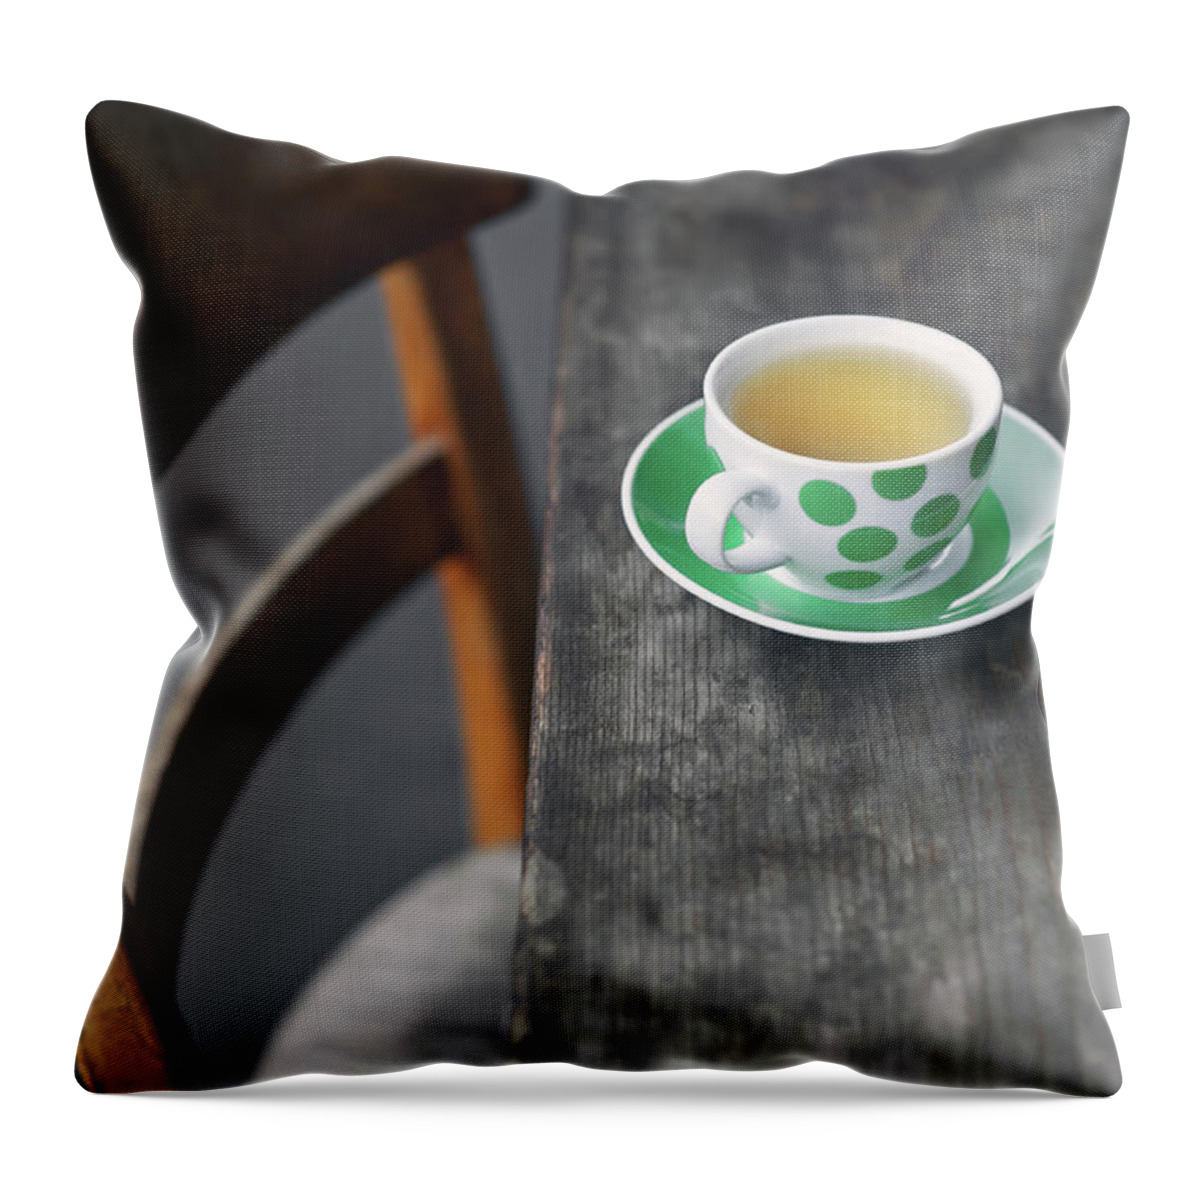 Gstaad Throw Pillow featuring the photograph Cup Of Tea On Wooden Table by A.y. Photography